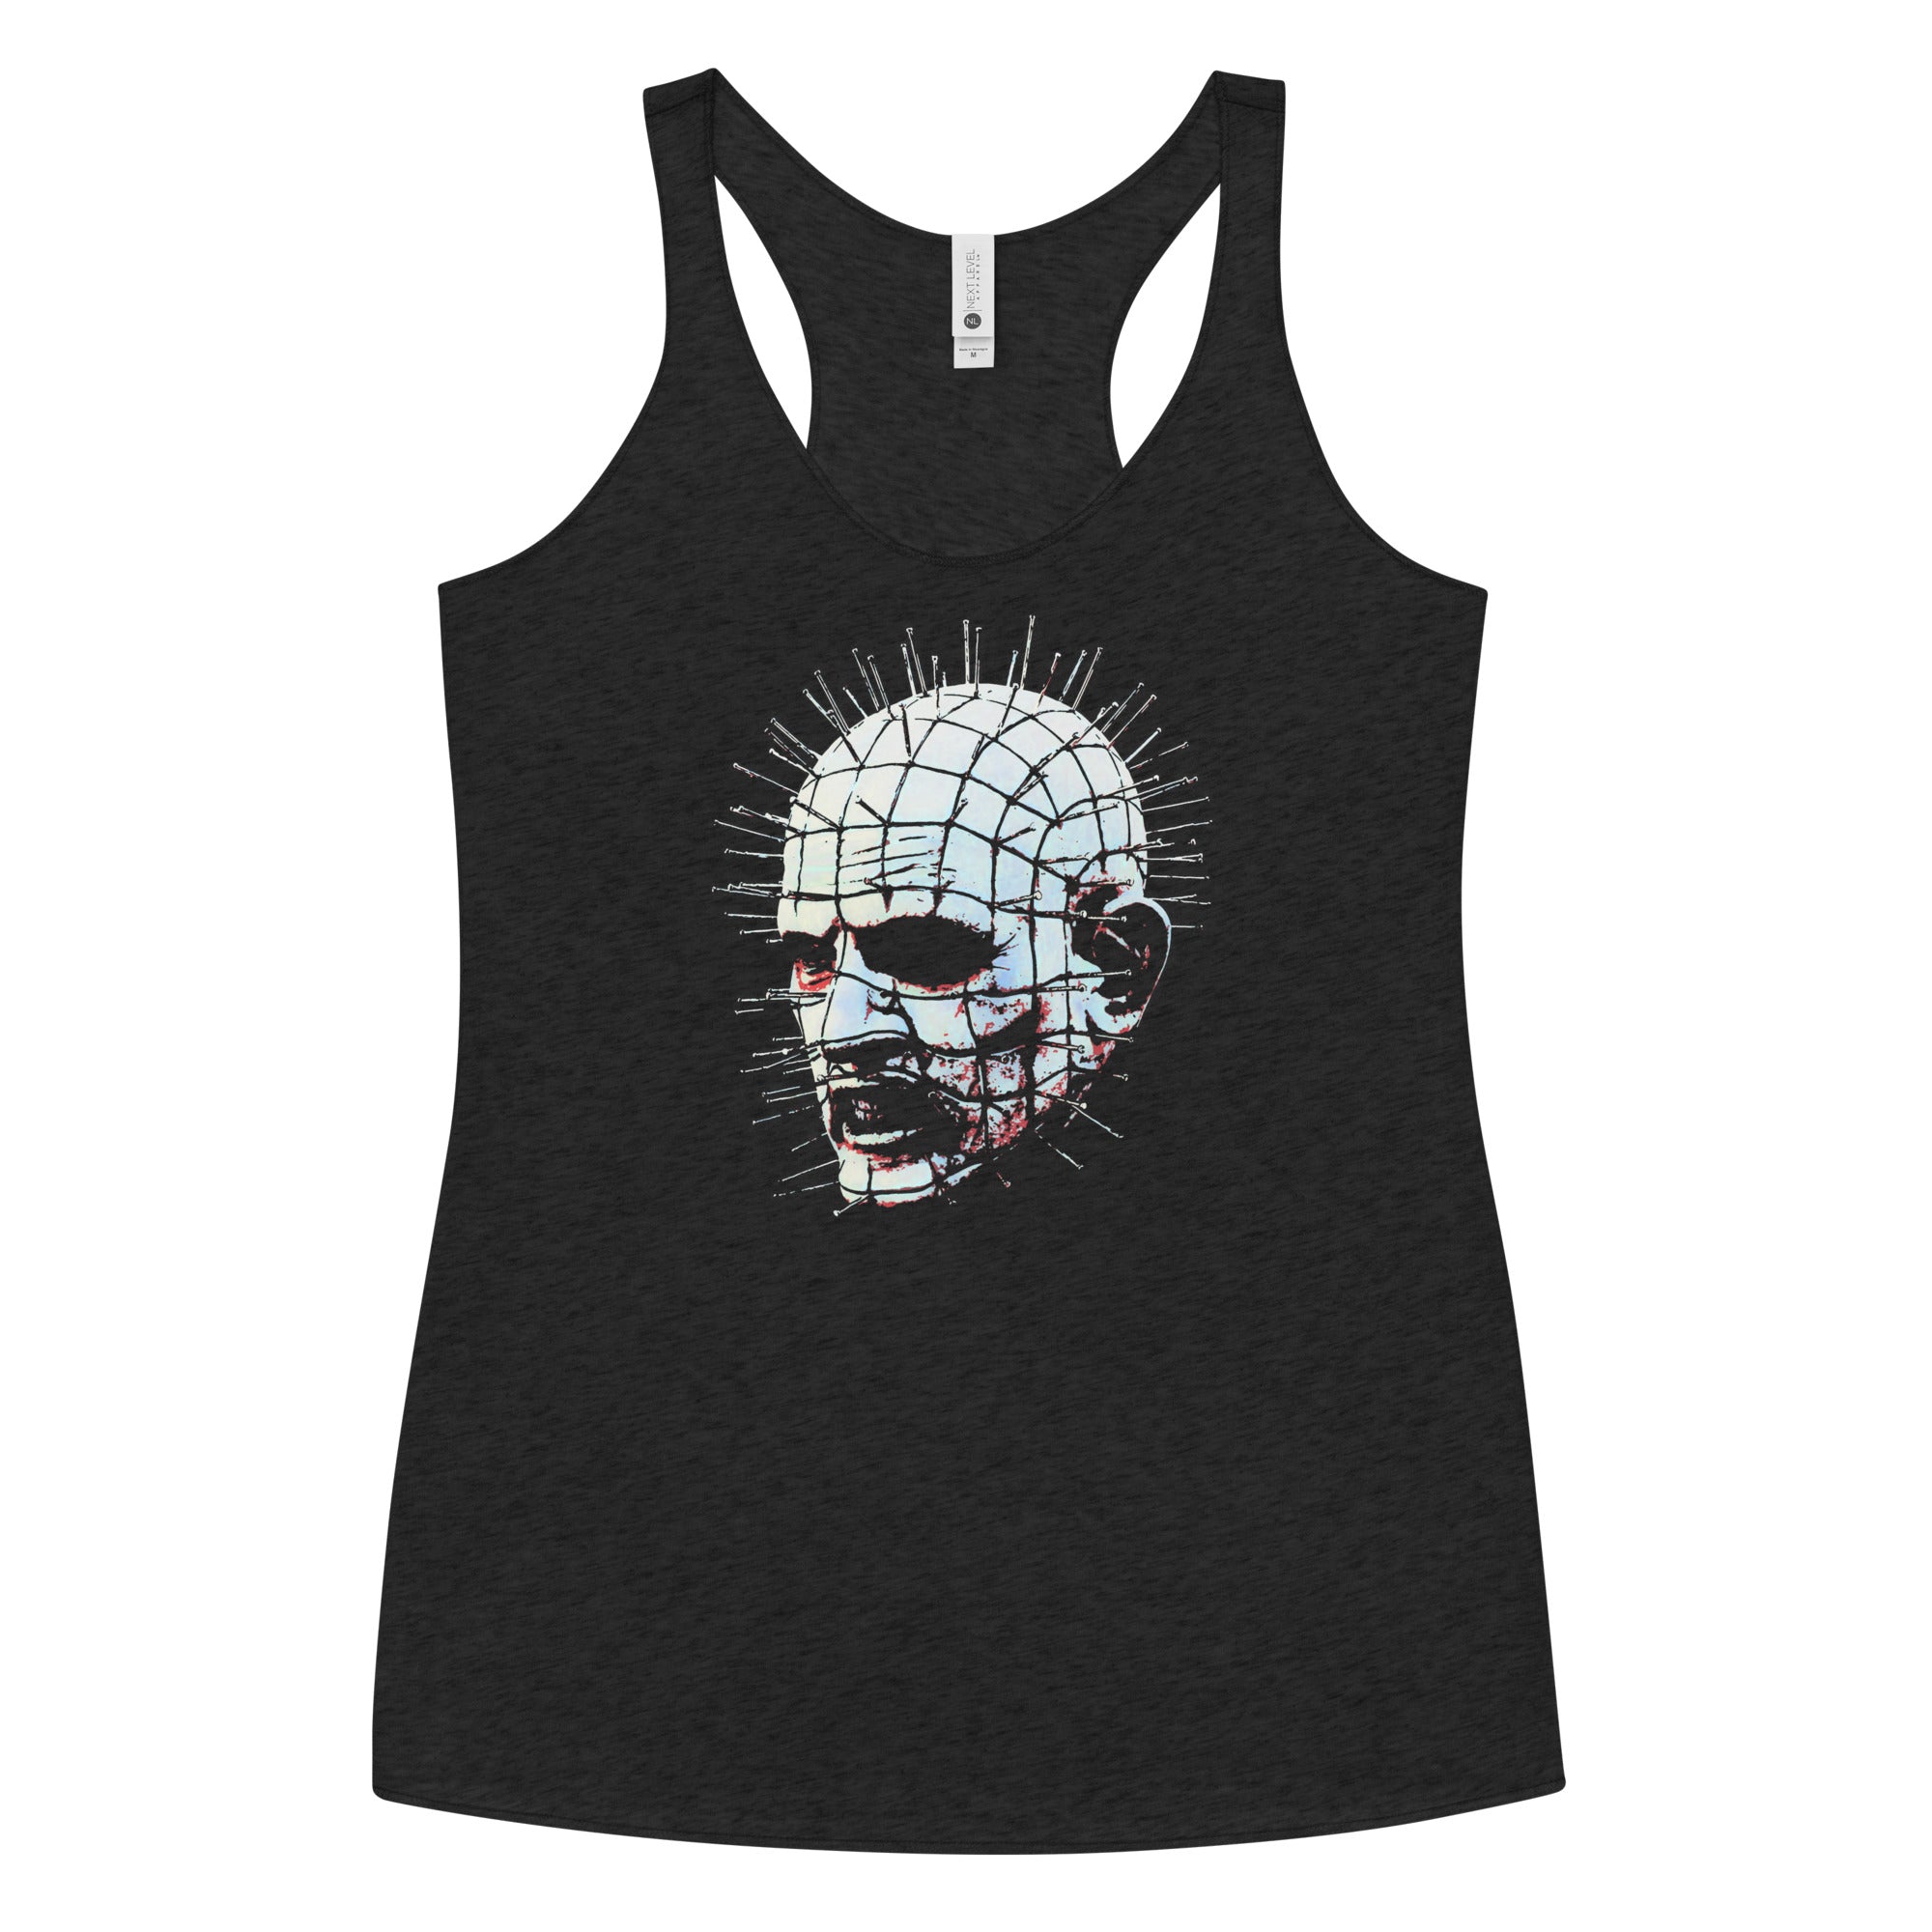 The Hell Priest Cenobite of Hellbound Heart Women's Racerback Tank Top Shirt